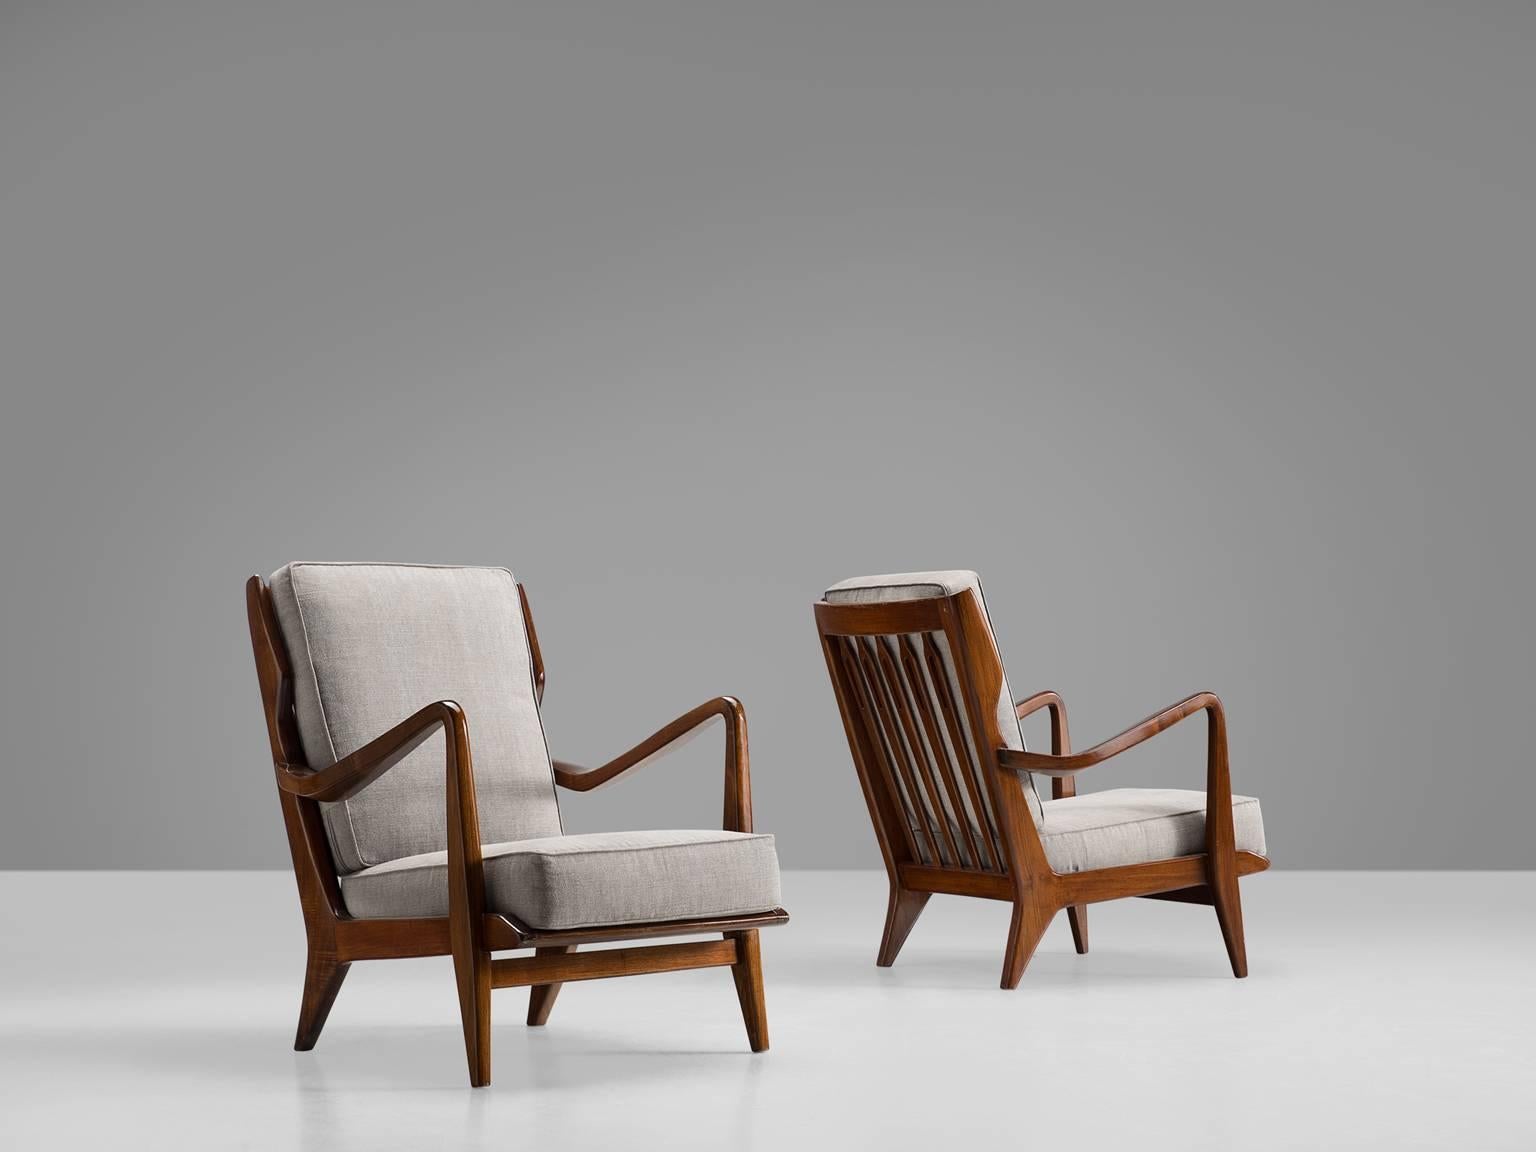 Gio Ponti for Cassina, pair of armchairs model 516, wood, grey upholstered fabric, Cassina, Italy, 1955, (expertise by Gio Ponti archives).

This set of chairs is designed by Gio Ponti and manufactured by Cassina. The chairs have a few distinct